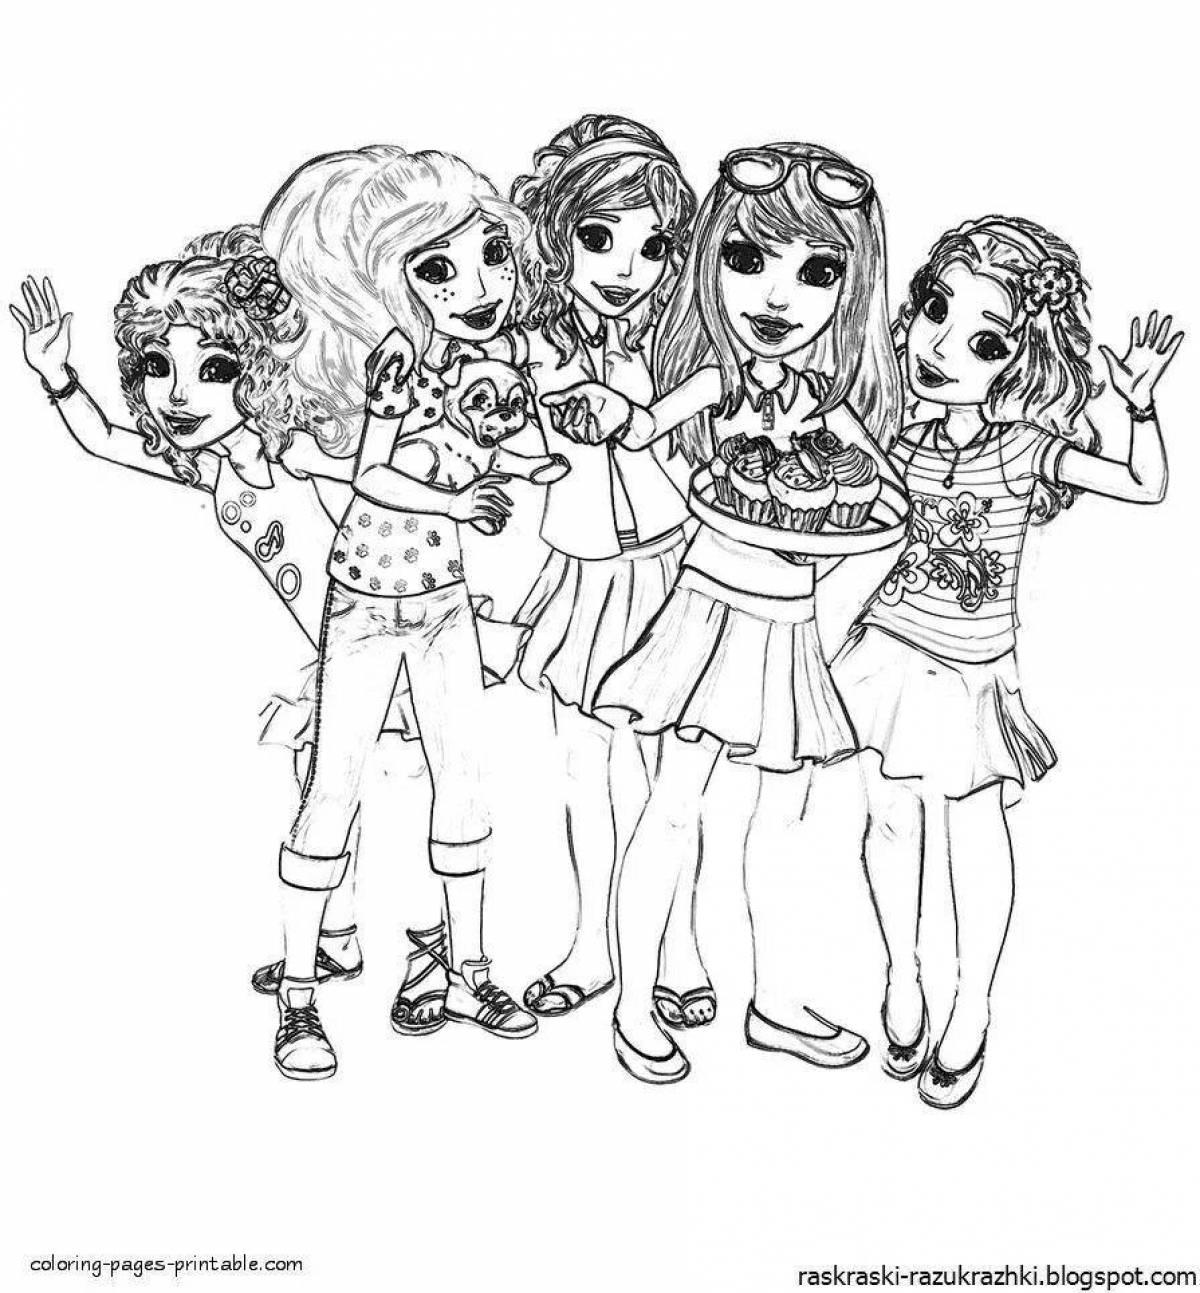 Gorgeous tramp friends coloring page